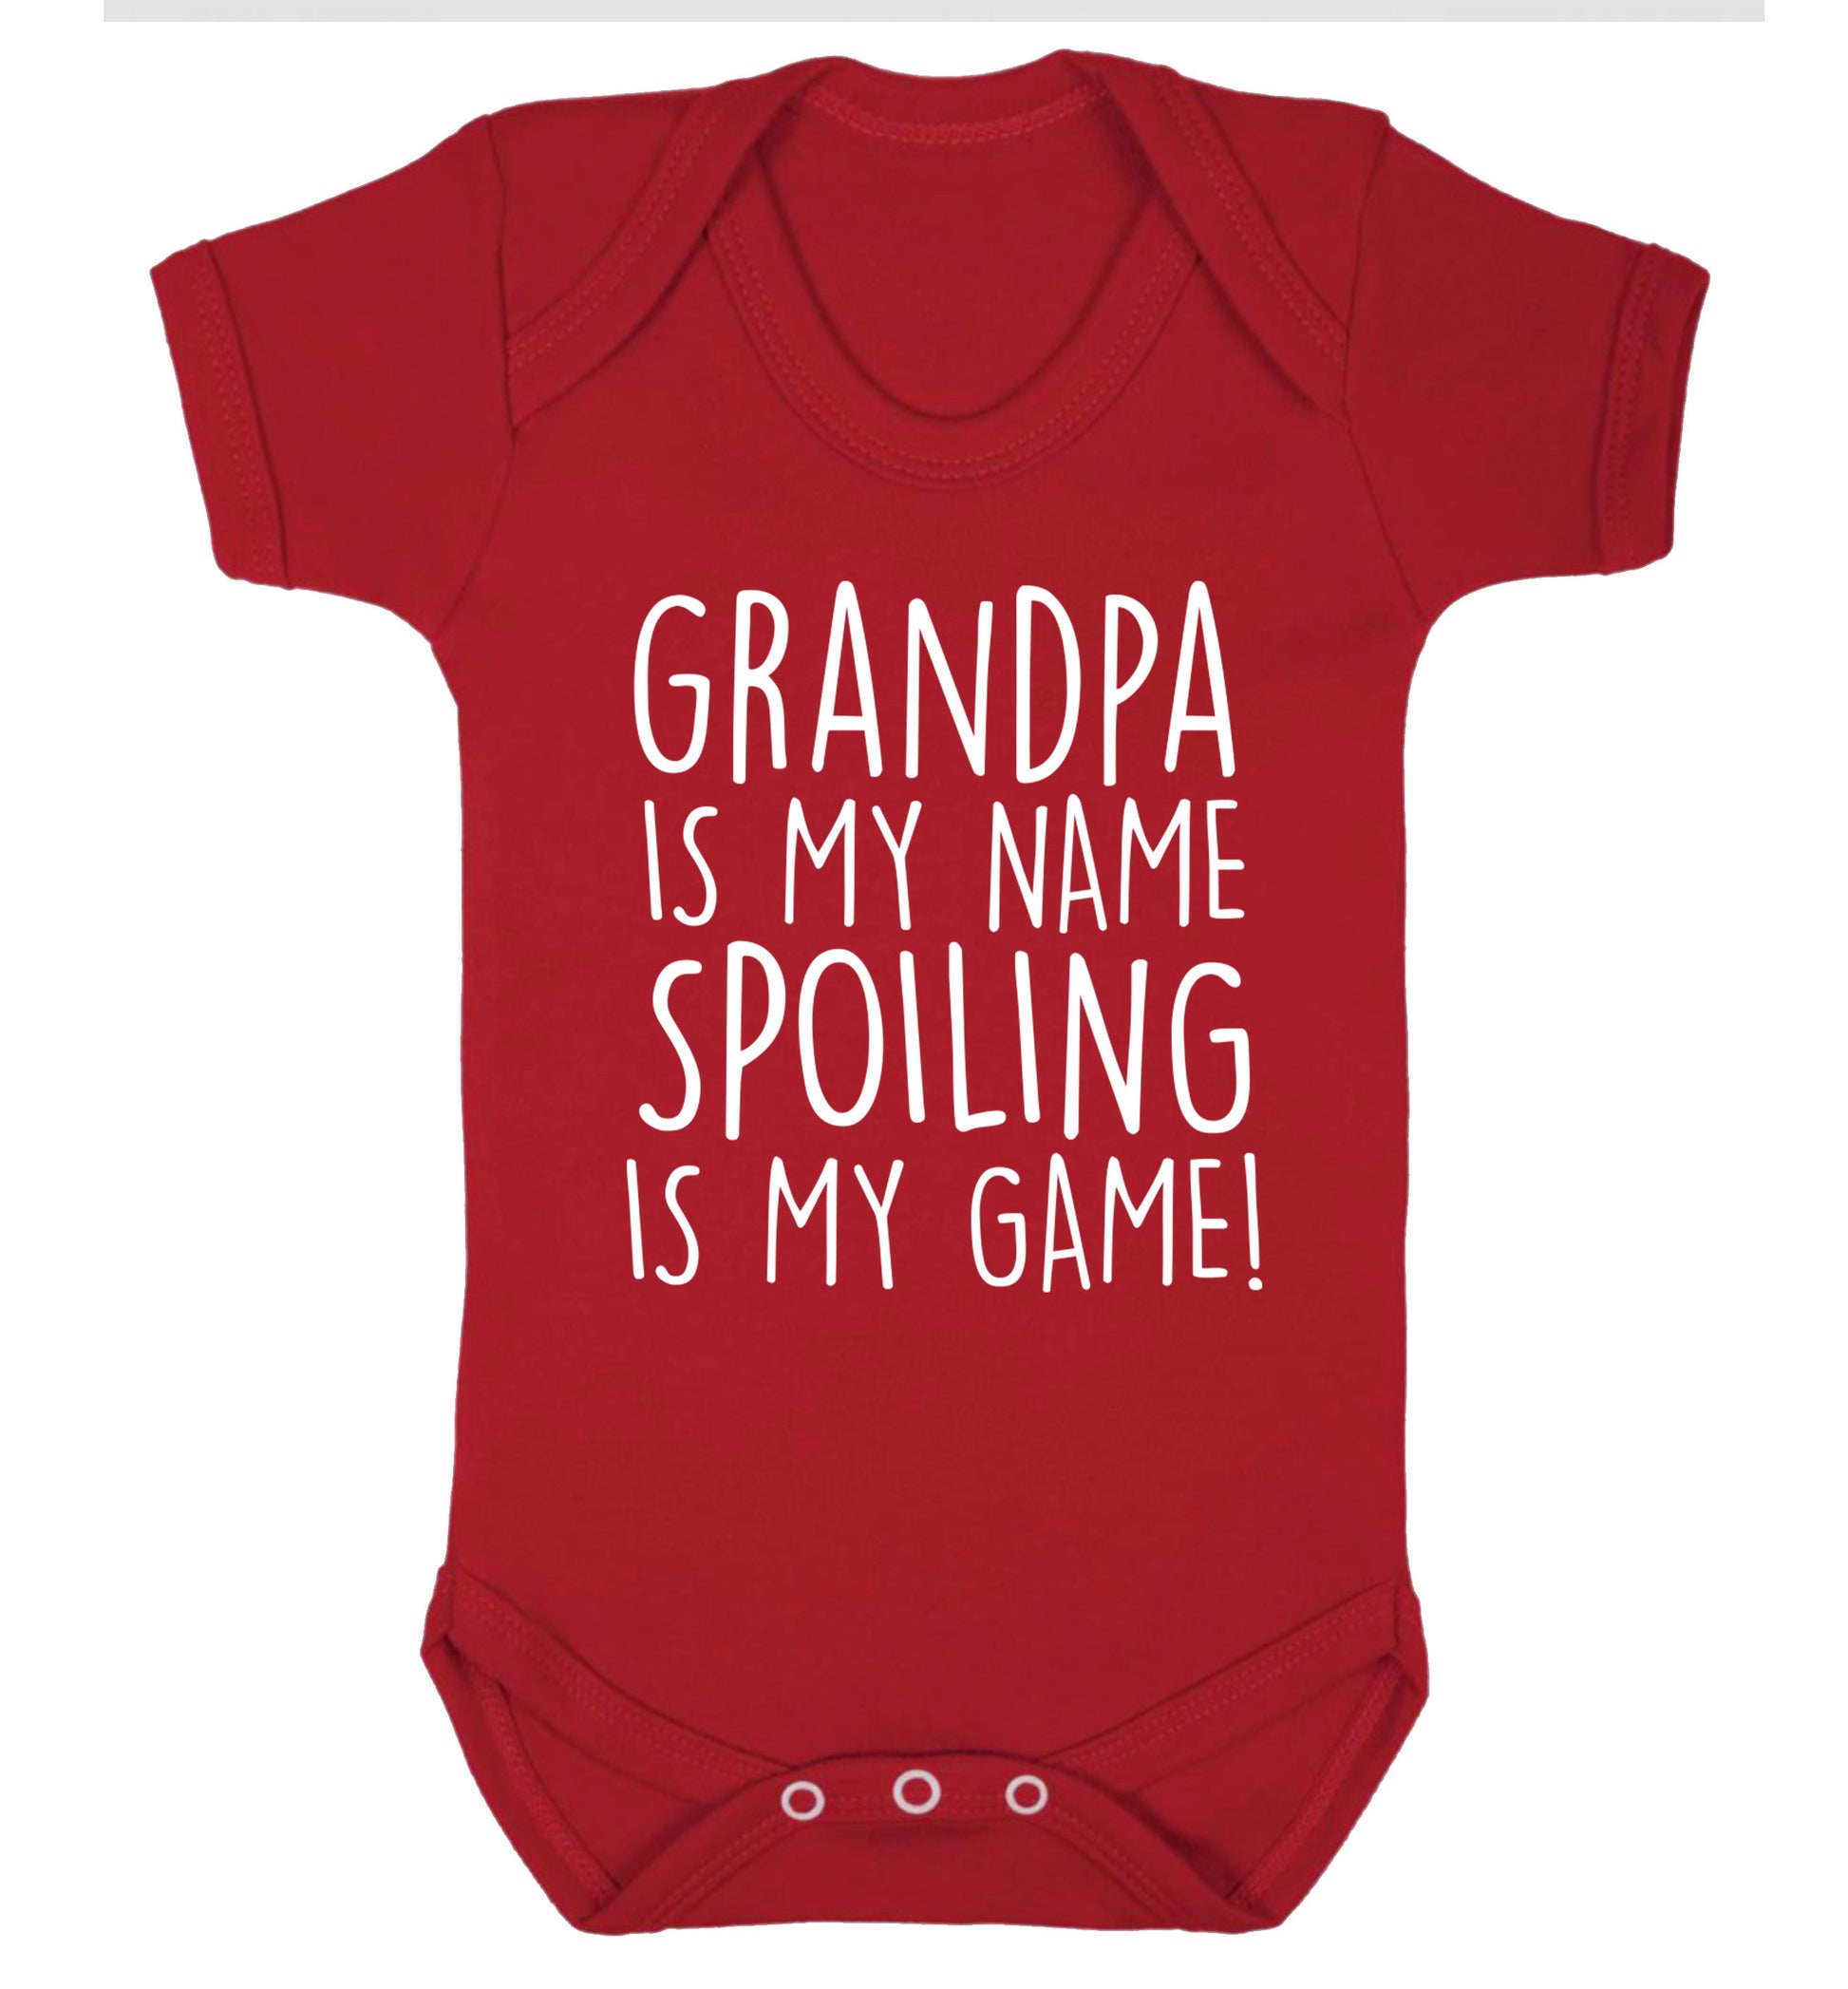 Grandpa is my name, spoiling is my game Baby Vest red 18-24 months